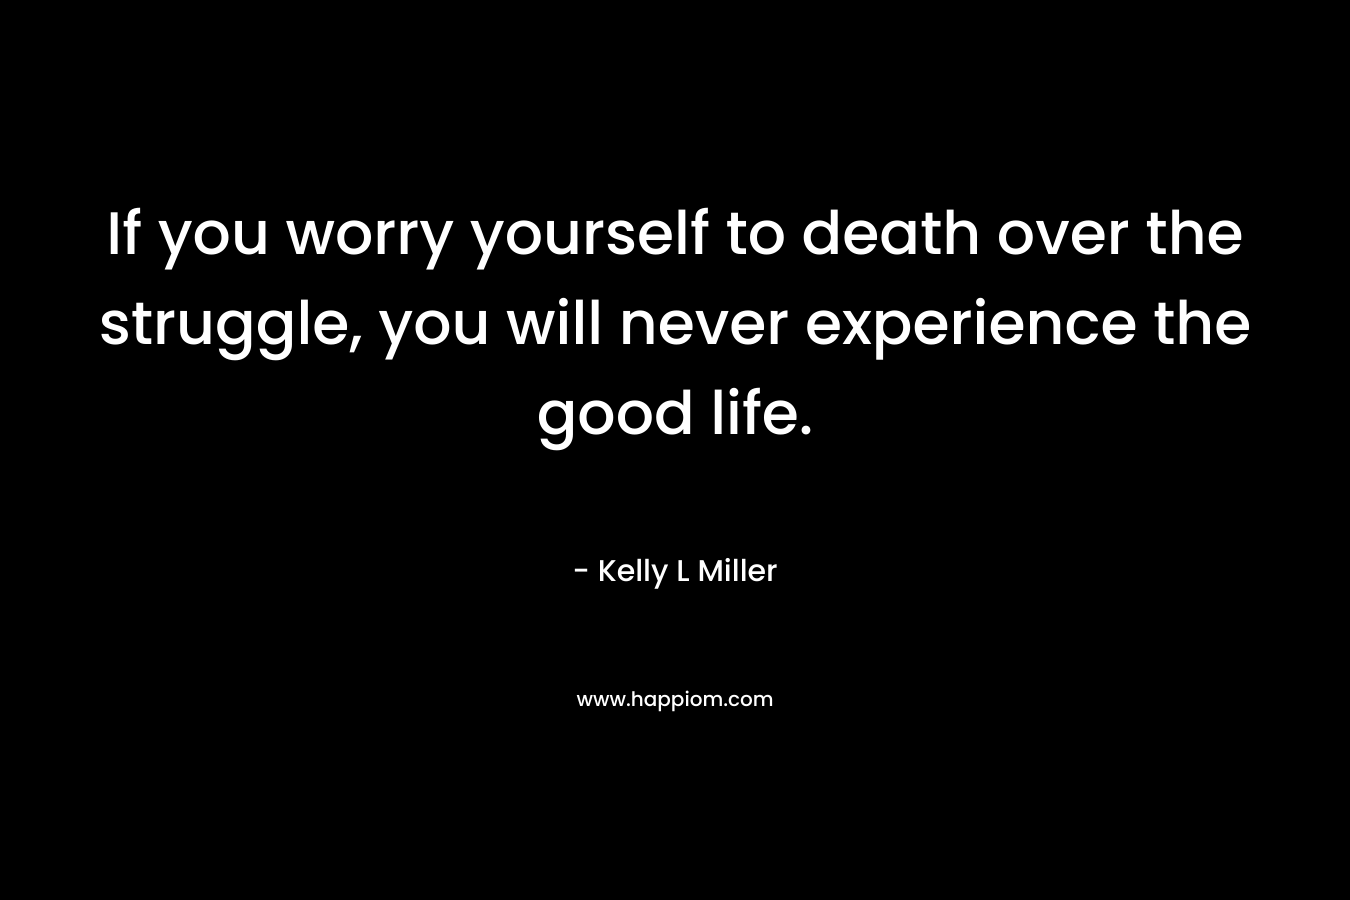 If you worry yourself to death over the struggle, you will never experience the good life. – Kelly L Miller